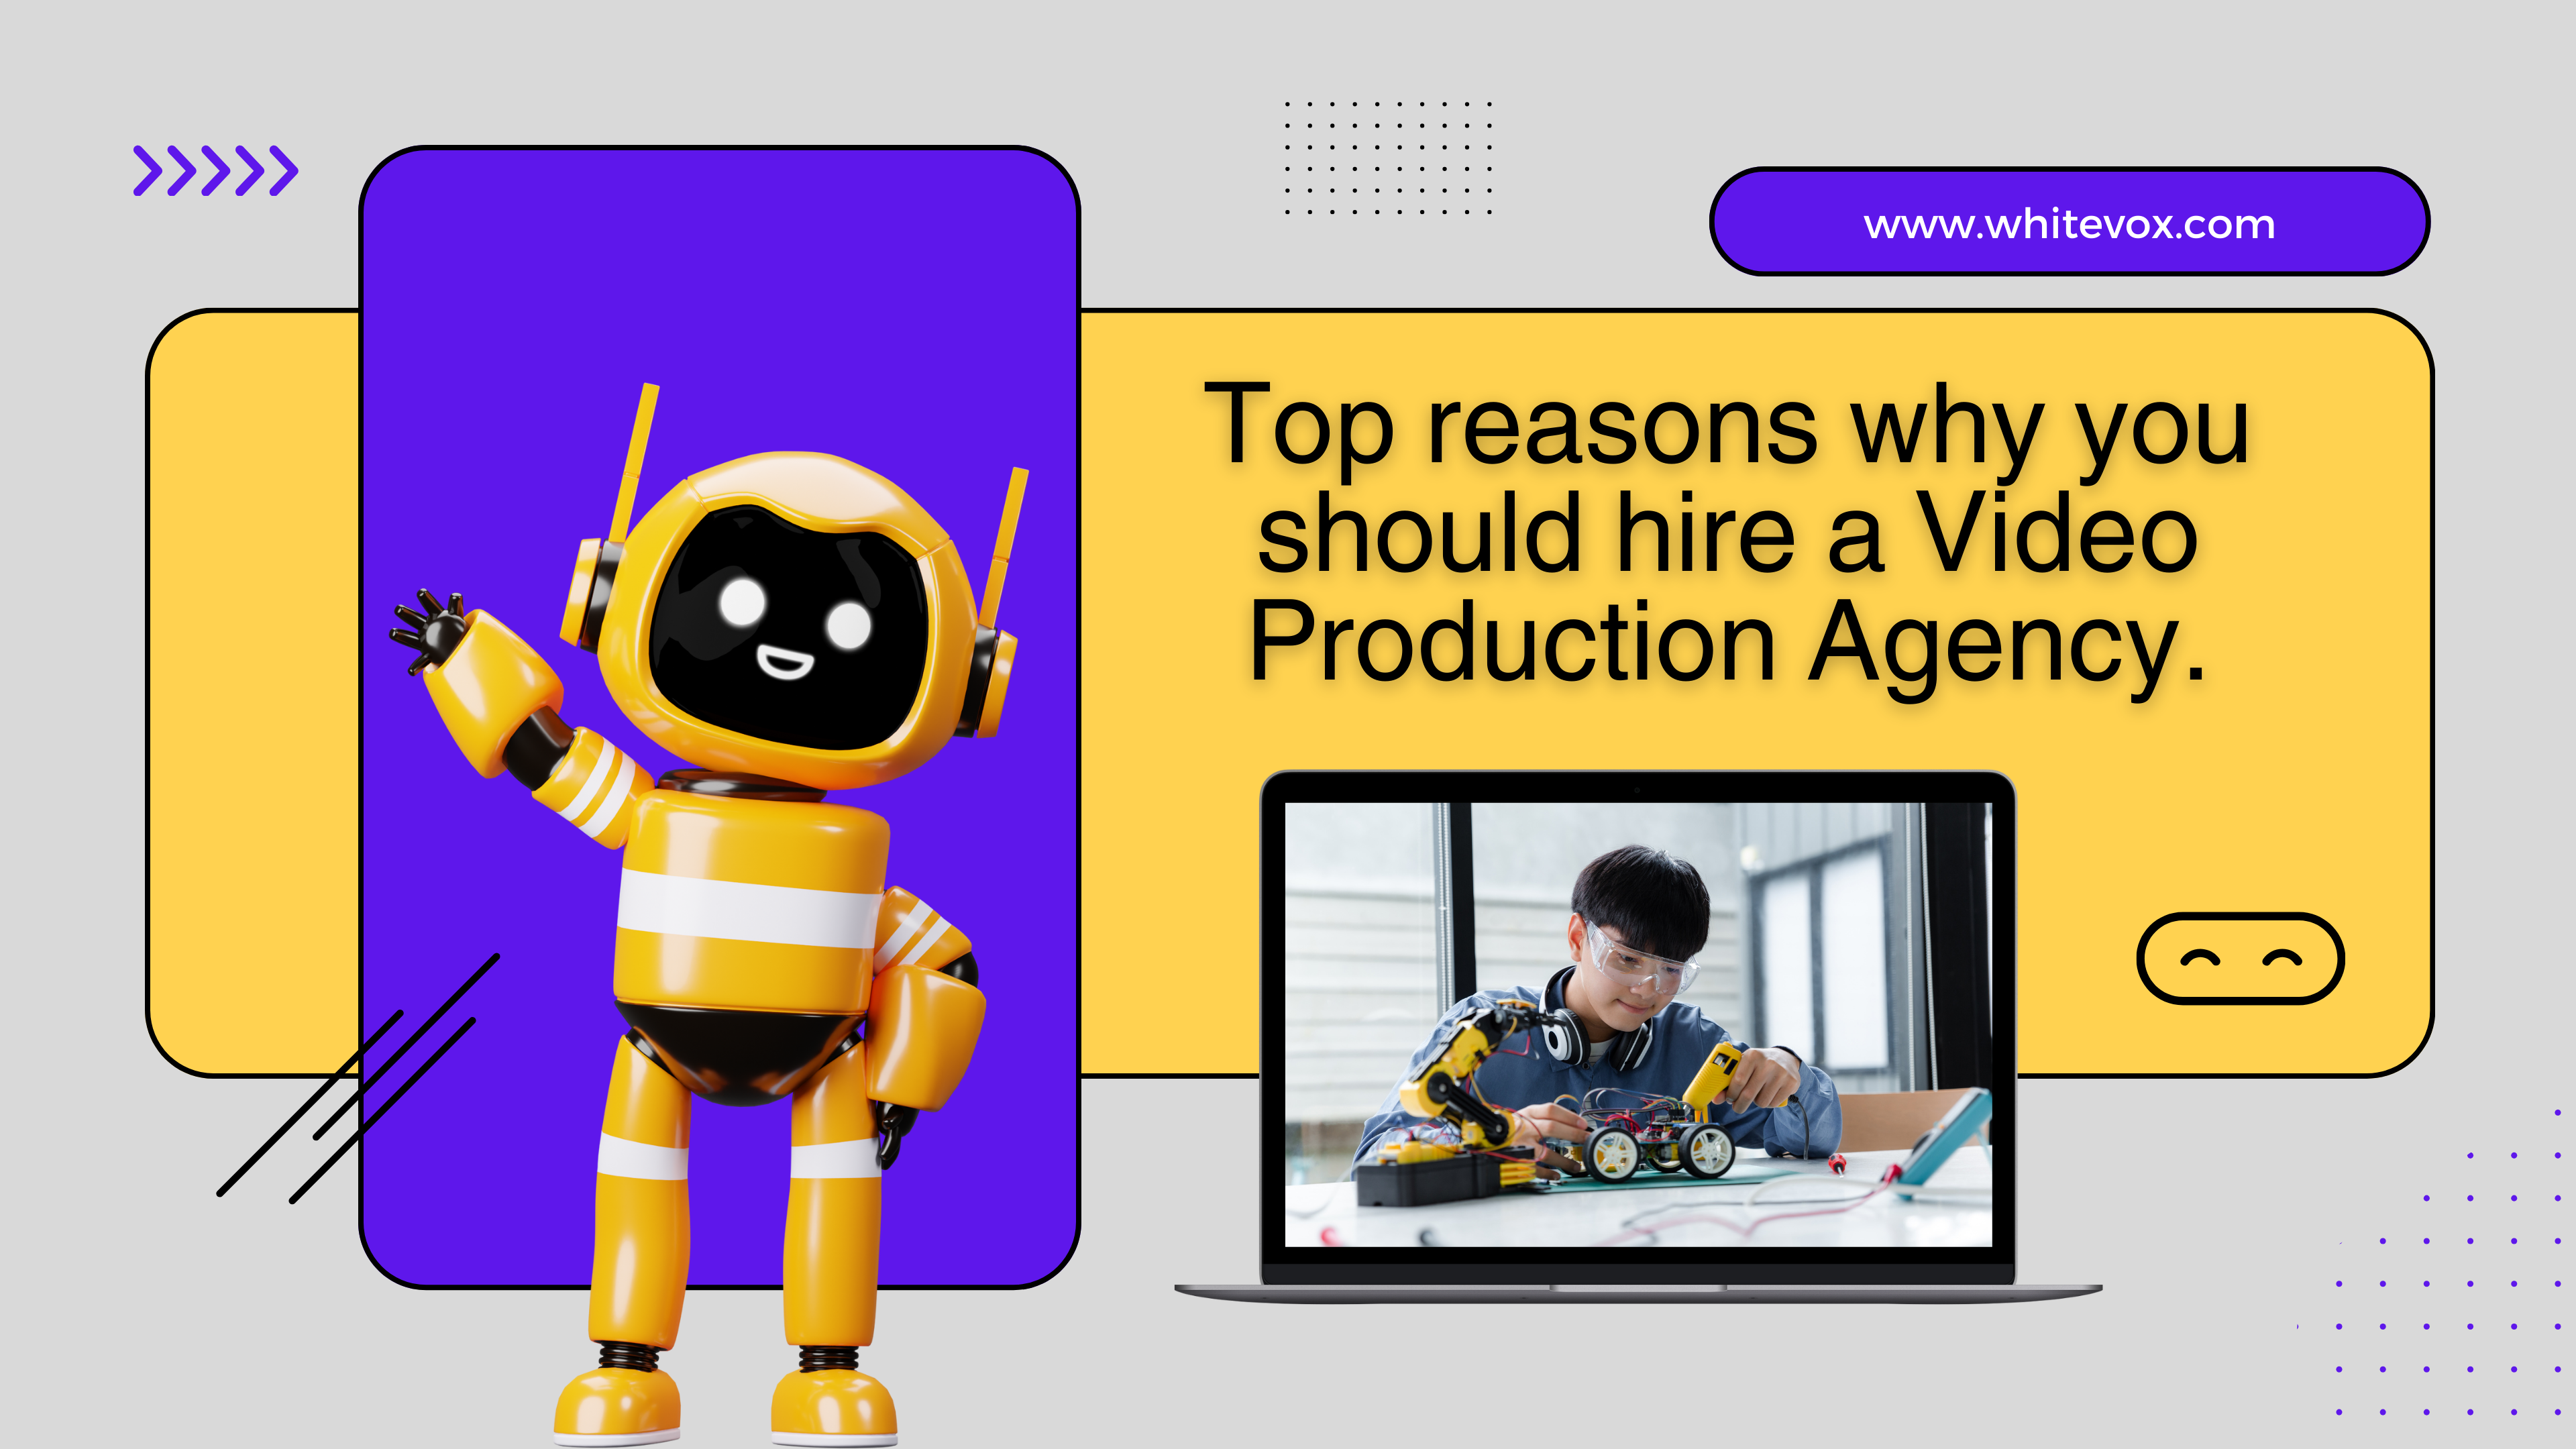 Top reasons why you should hire a video production agency